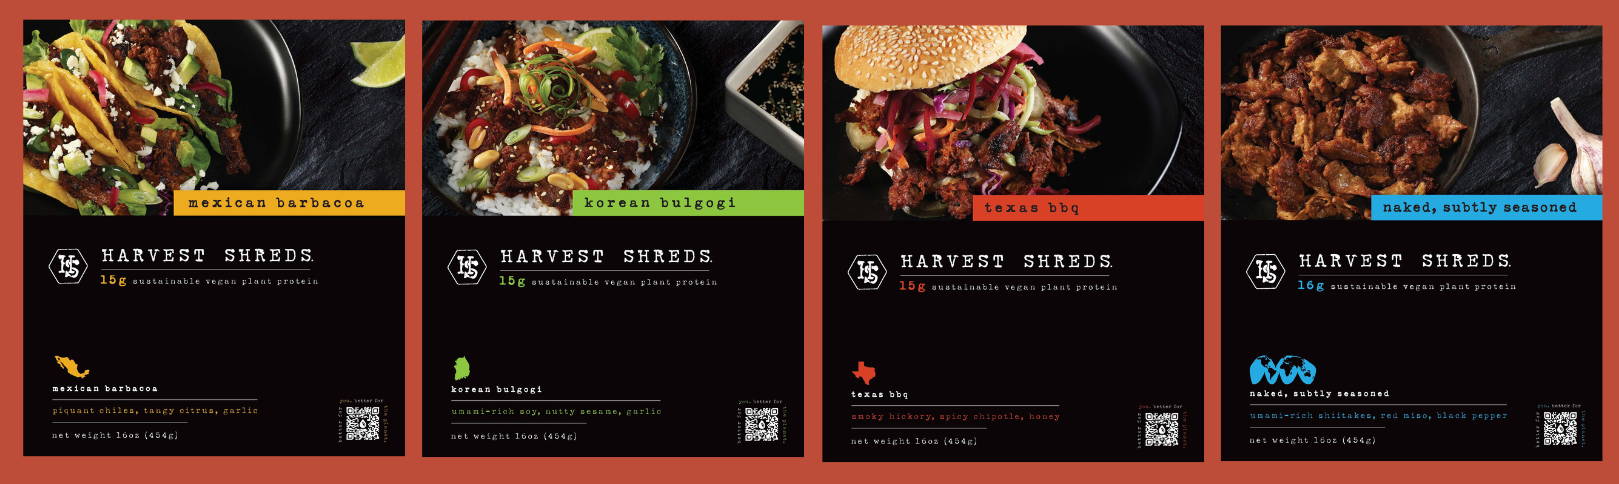 Packaging for Mexican Barbacoa, Korean Bulgogi, Texas BBQ and Naked, Subtly Seasoned  Harvest shreds including photos of the product used in various dishes. 